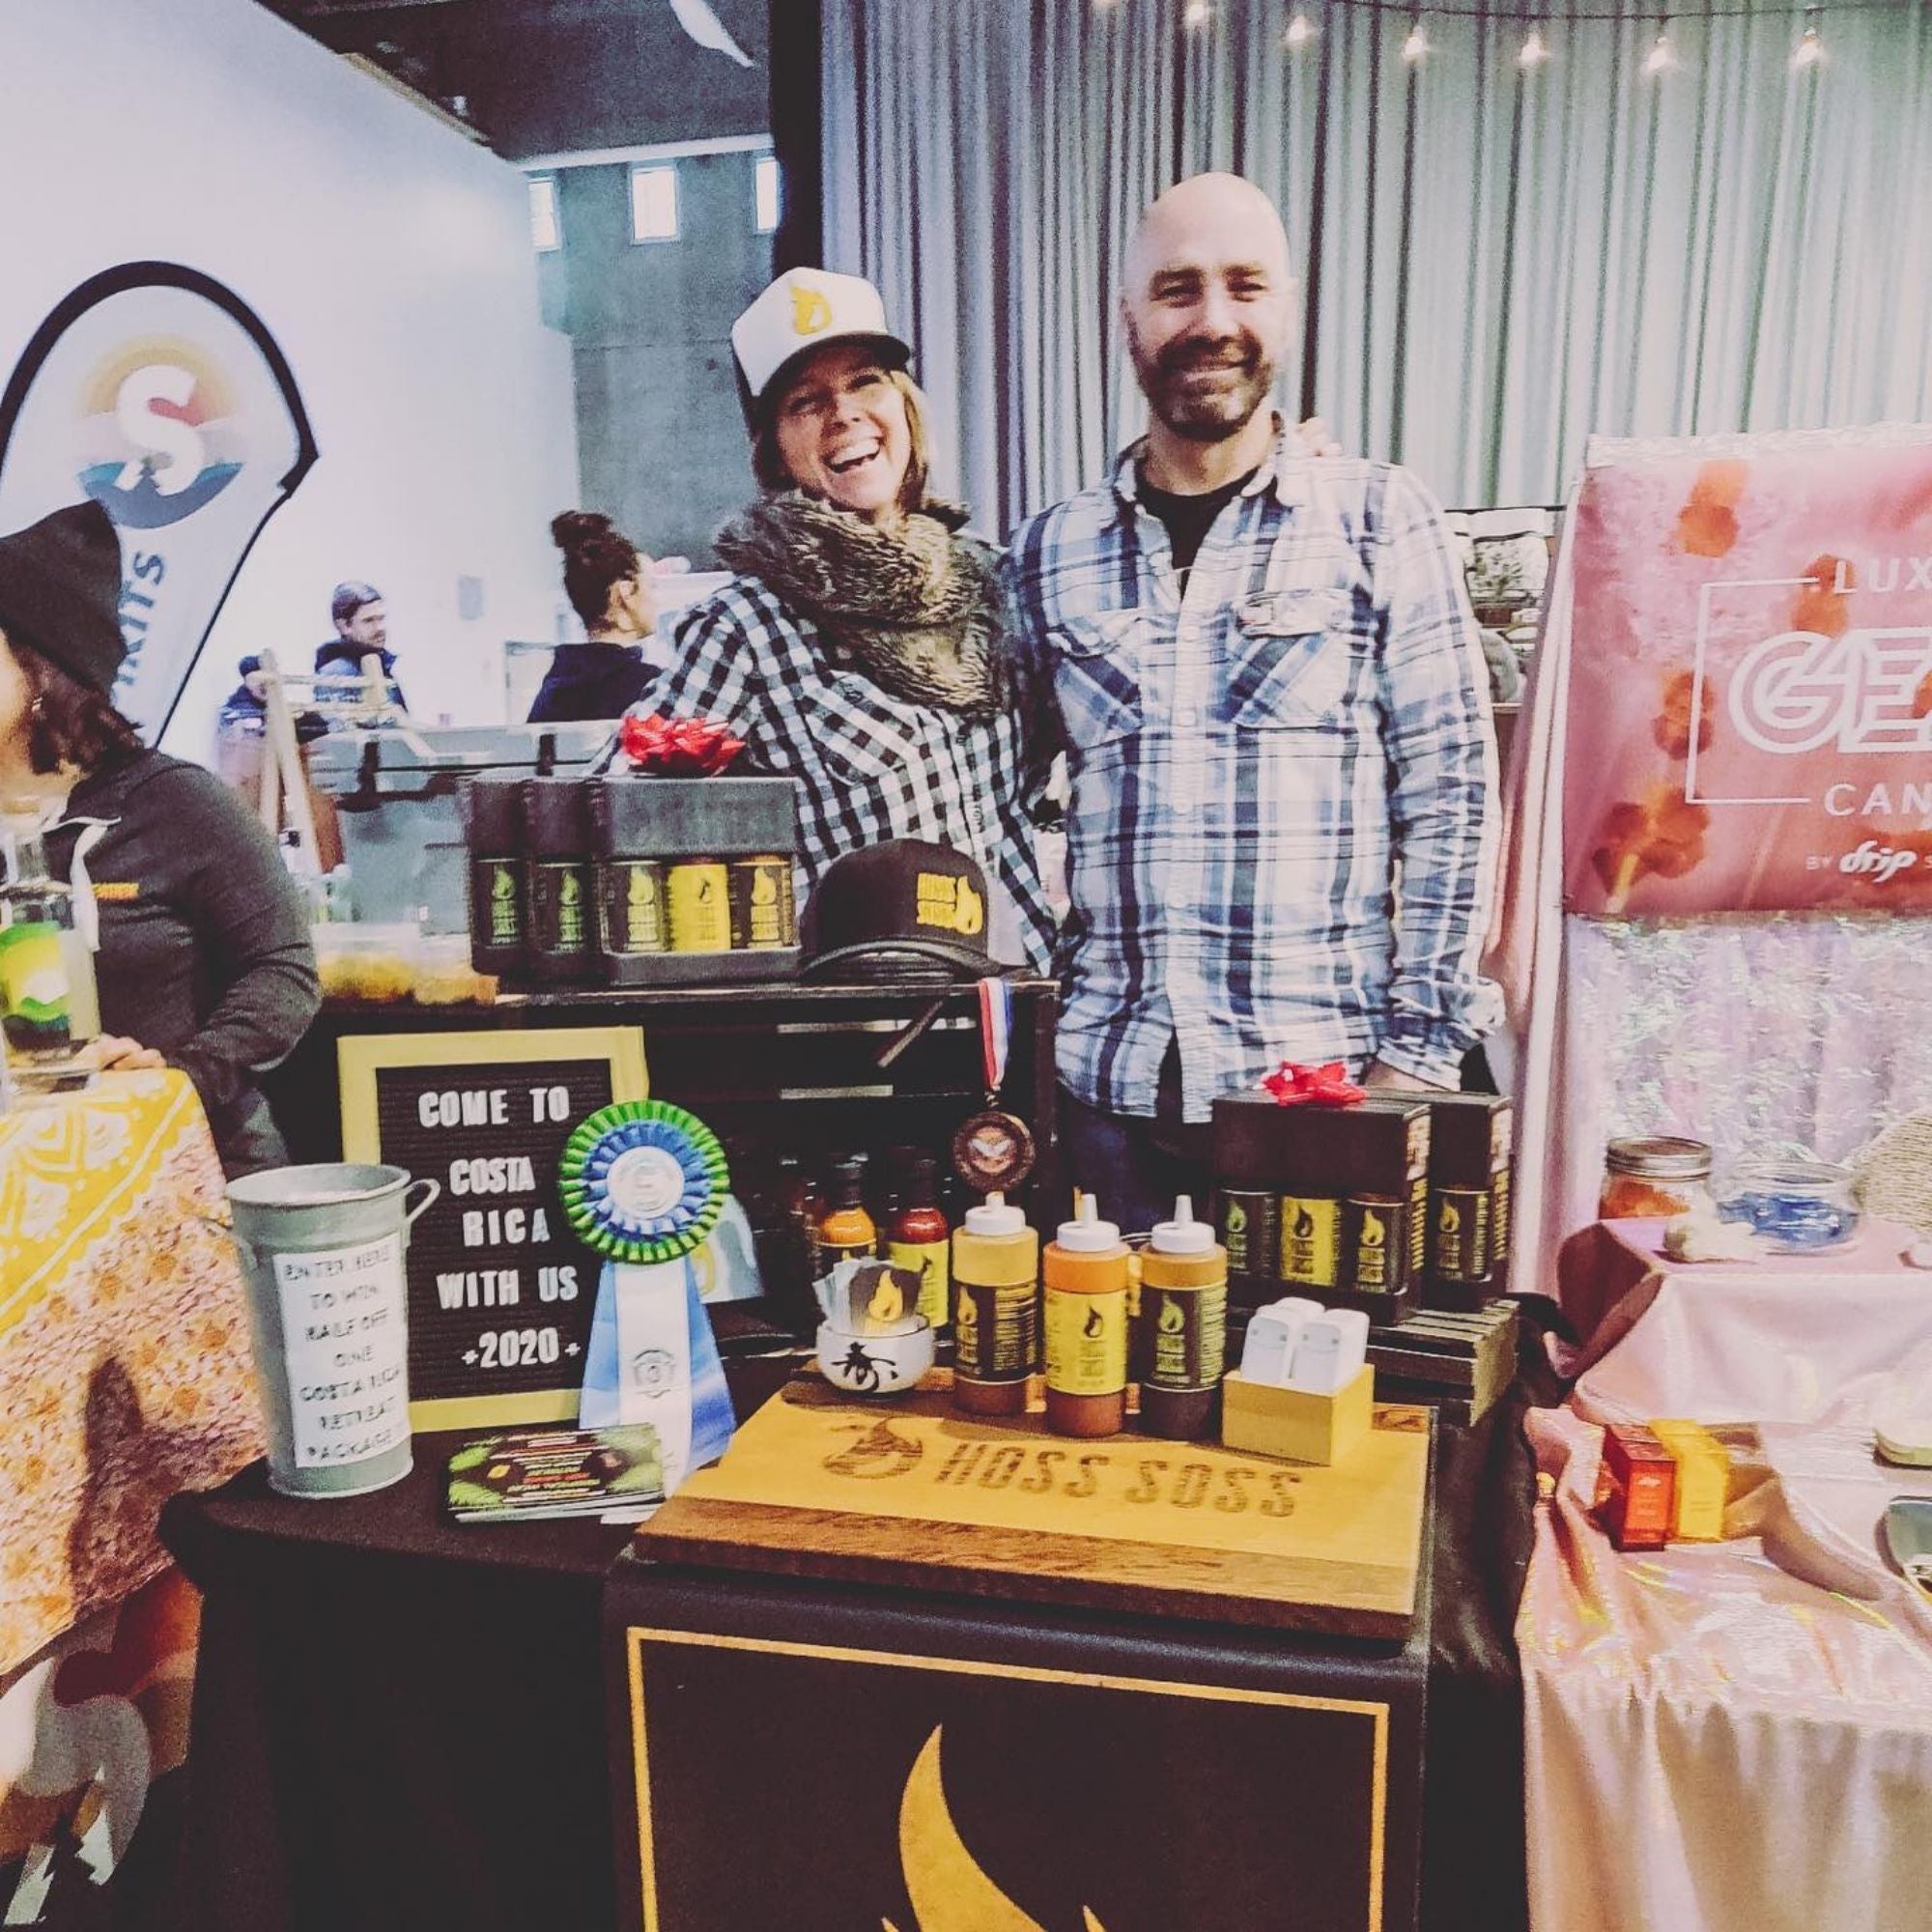 Matt and Cath of Hoss Soss on Costa Rican Inspired Flavors and the Oregon Hot Sauce Community - Podcast